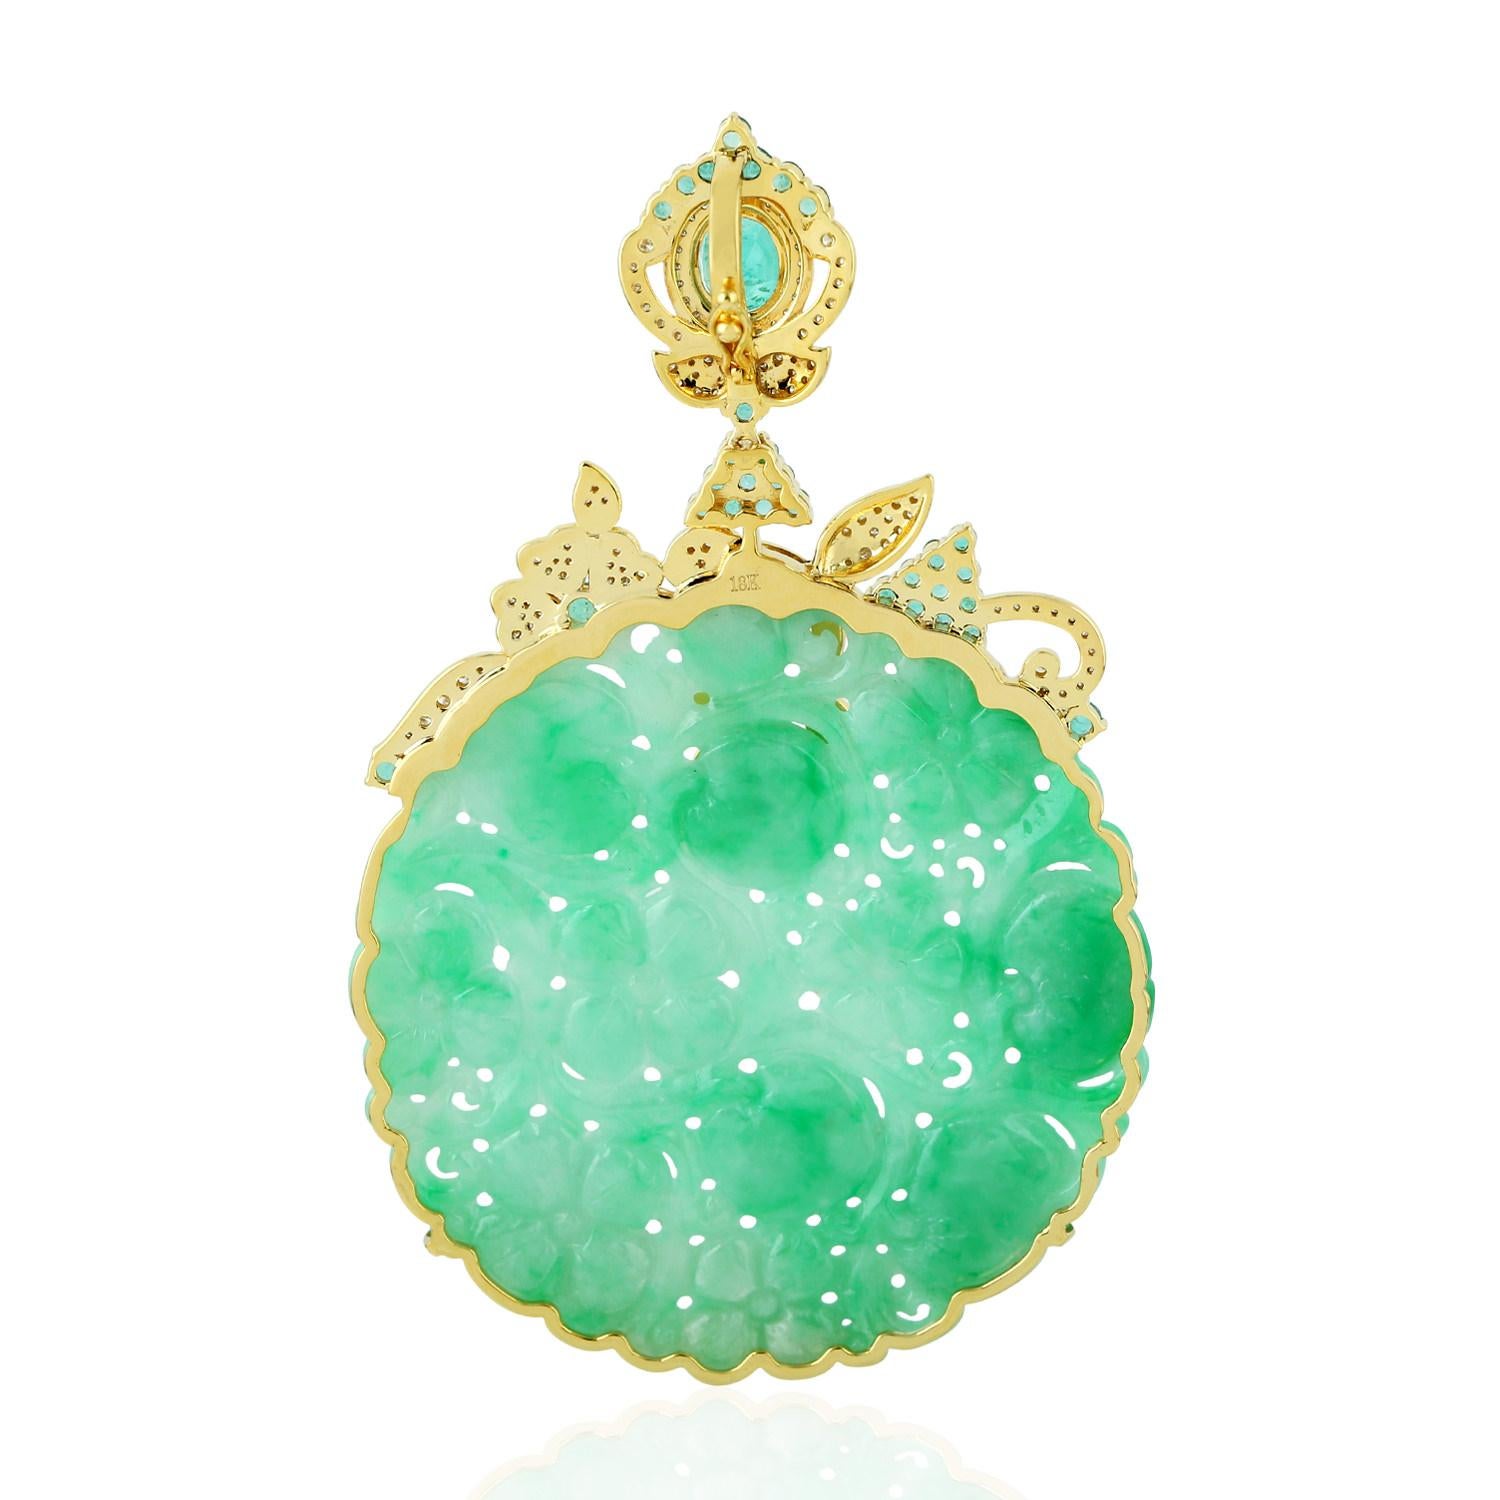 Cast in 18 Karat gold, this beautiful pendant features 50.51 carats of carved Jade, 1.67 carats emerald & .77 carats of sparkling diamonds.  

FOLLOW  MEGHNA JEWELS storefront to view the latest collection & exclusive pieces.  Meghna Jewels is